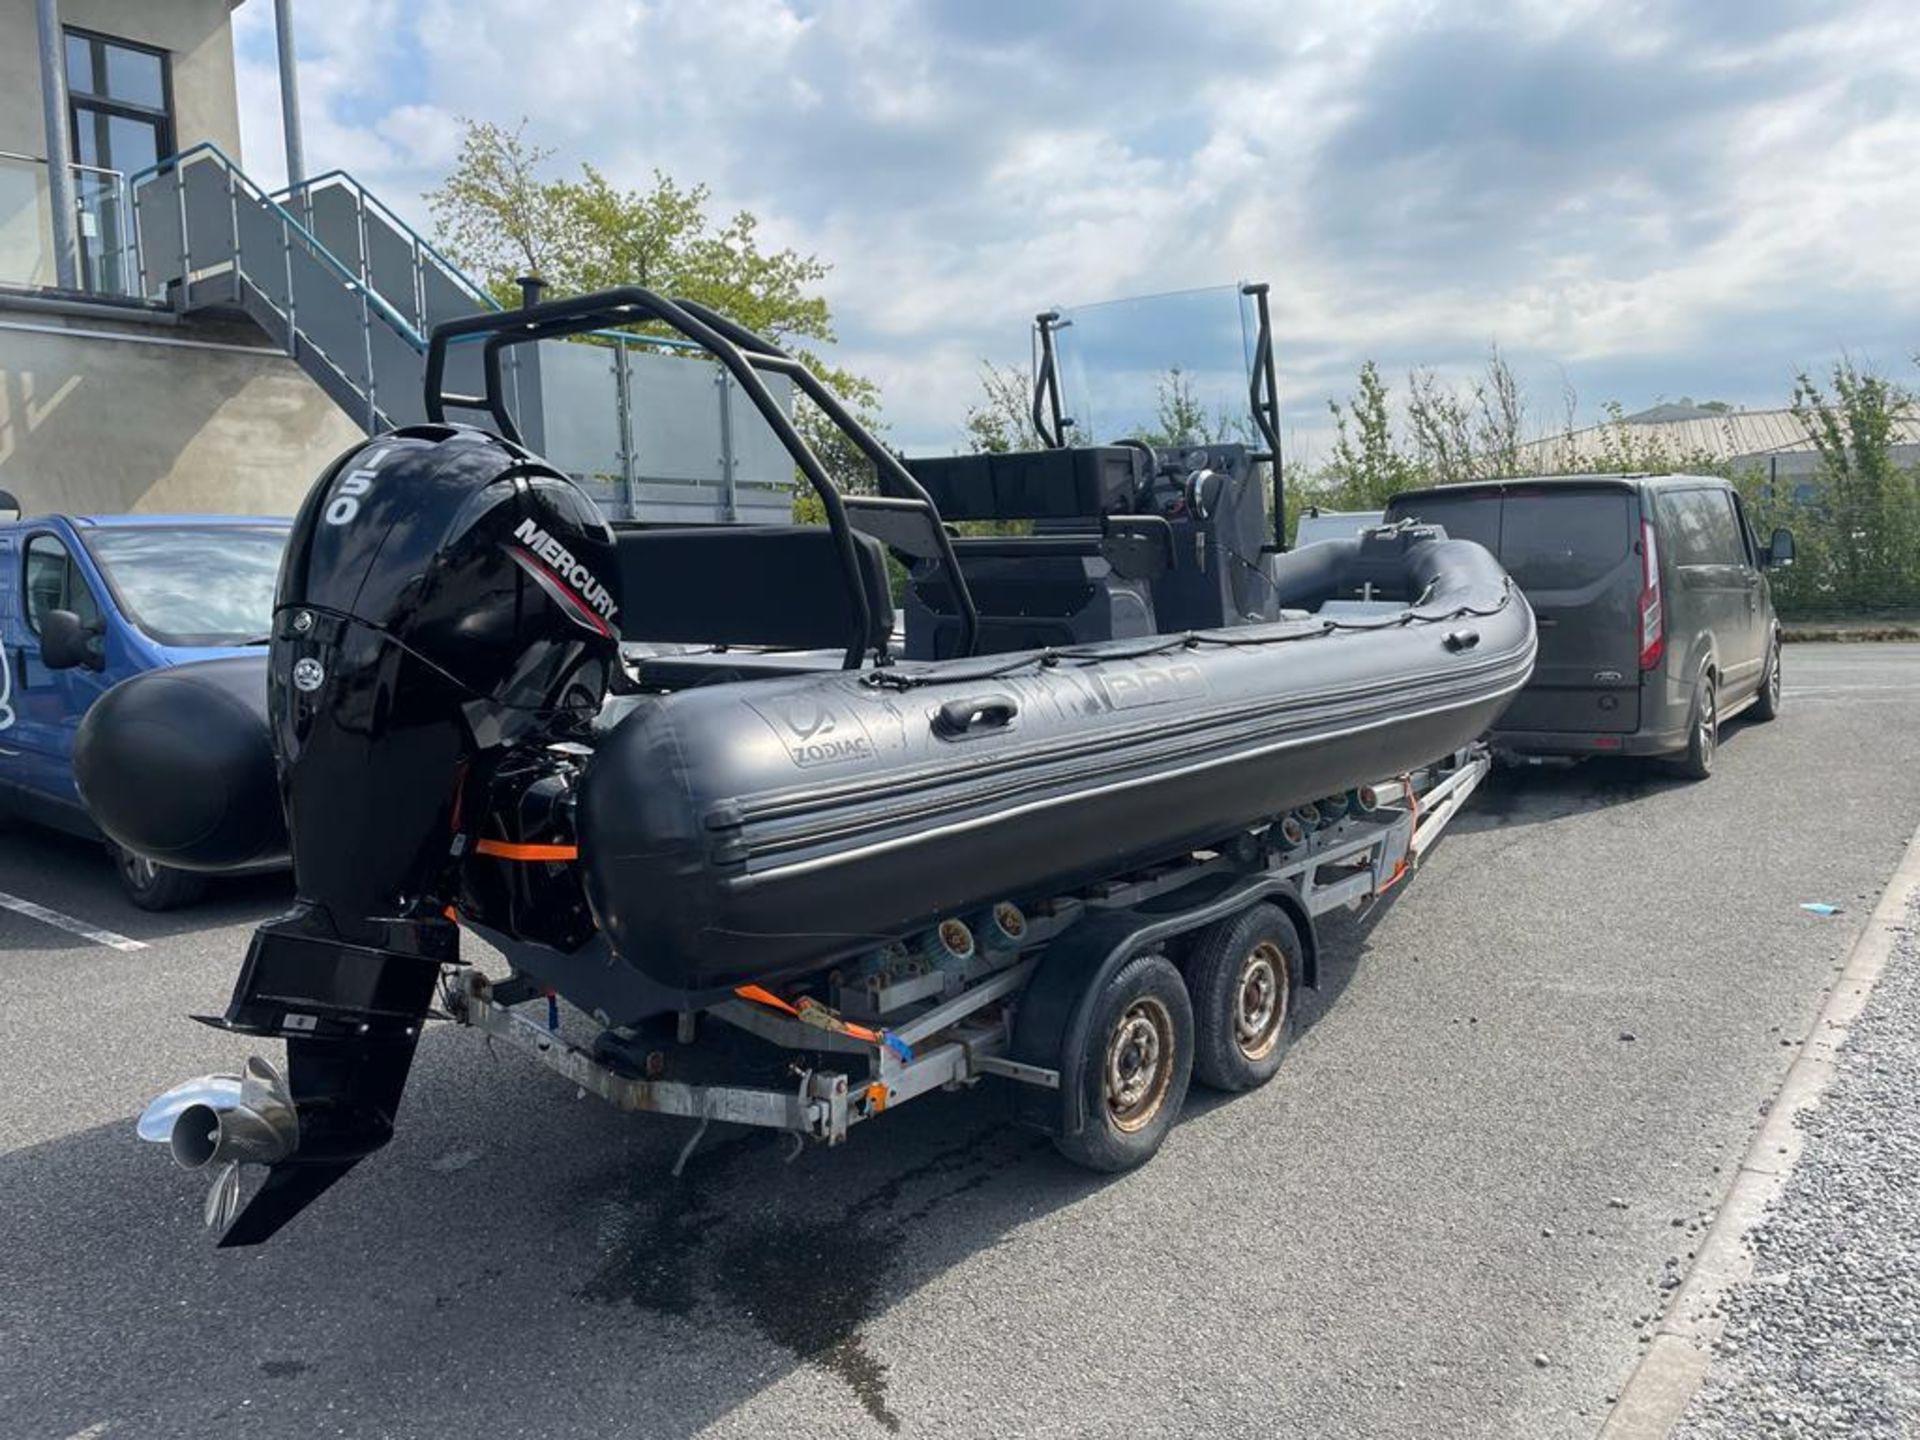 Zodiac 650 Pro rigid inflatable boat with Mercury 150 outboard engine. Includes road trailer. - Image 2 of 14